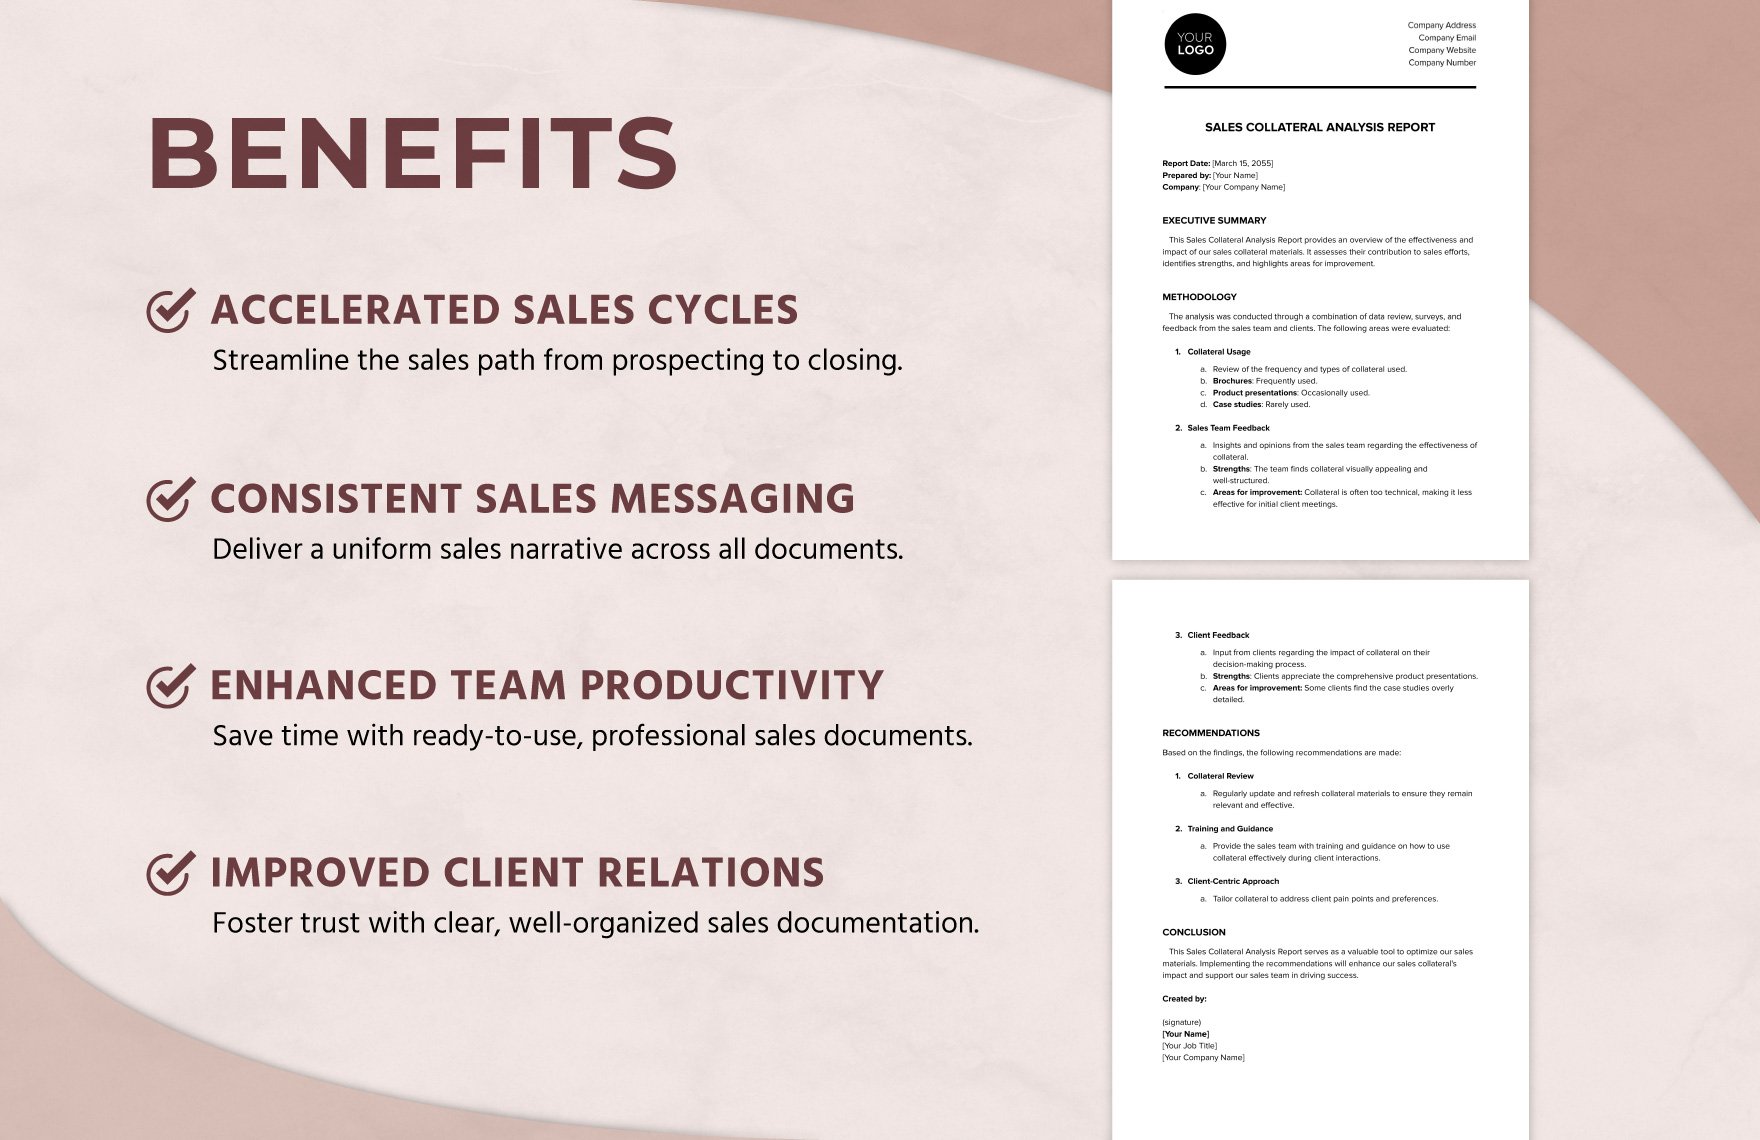 Sales Collateral Analysis Report Template